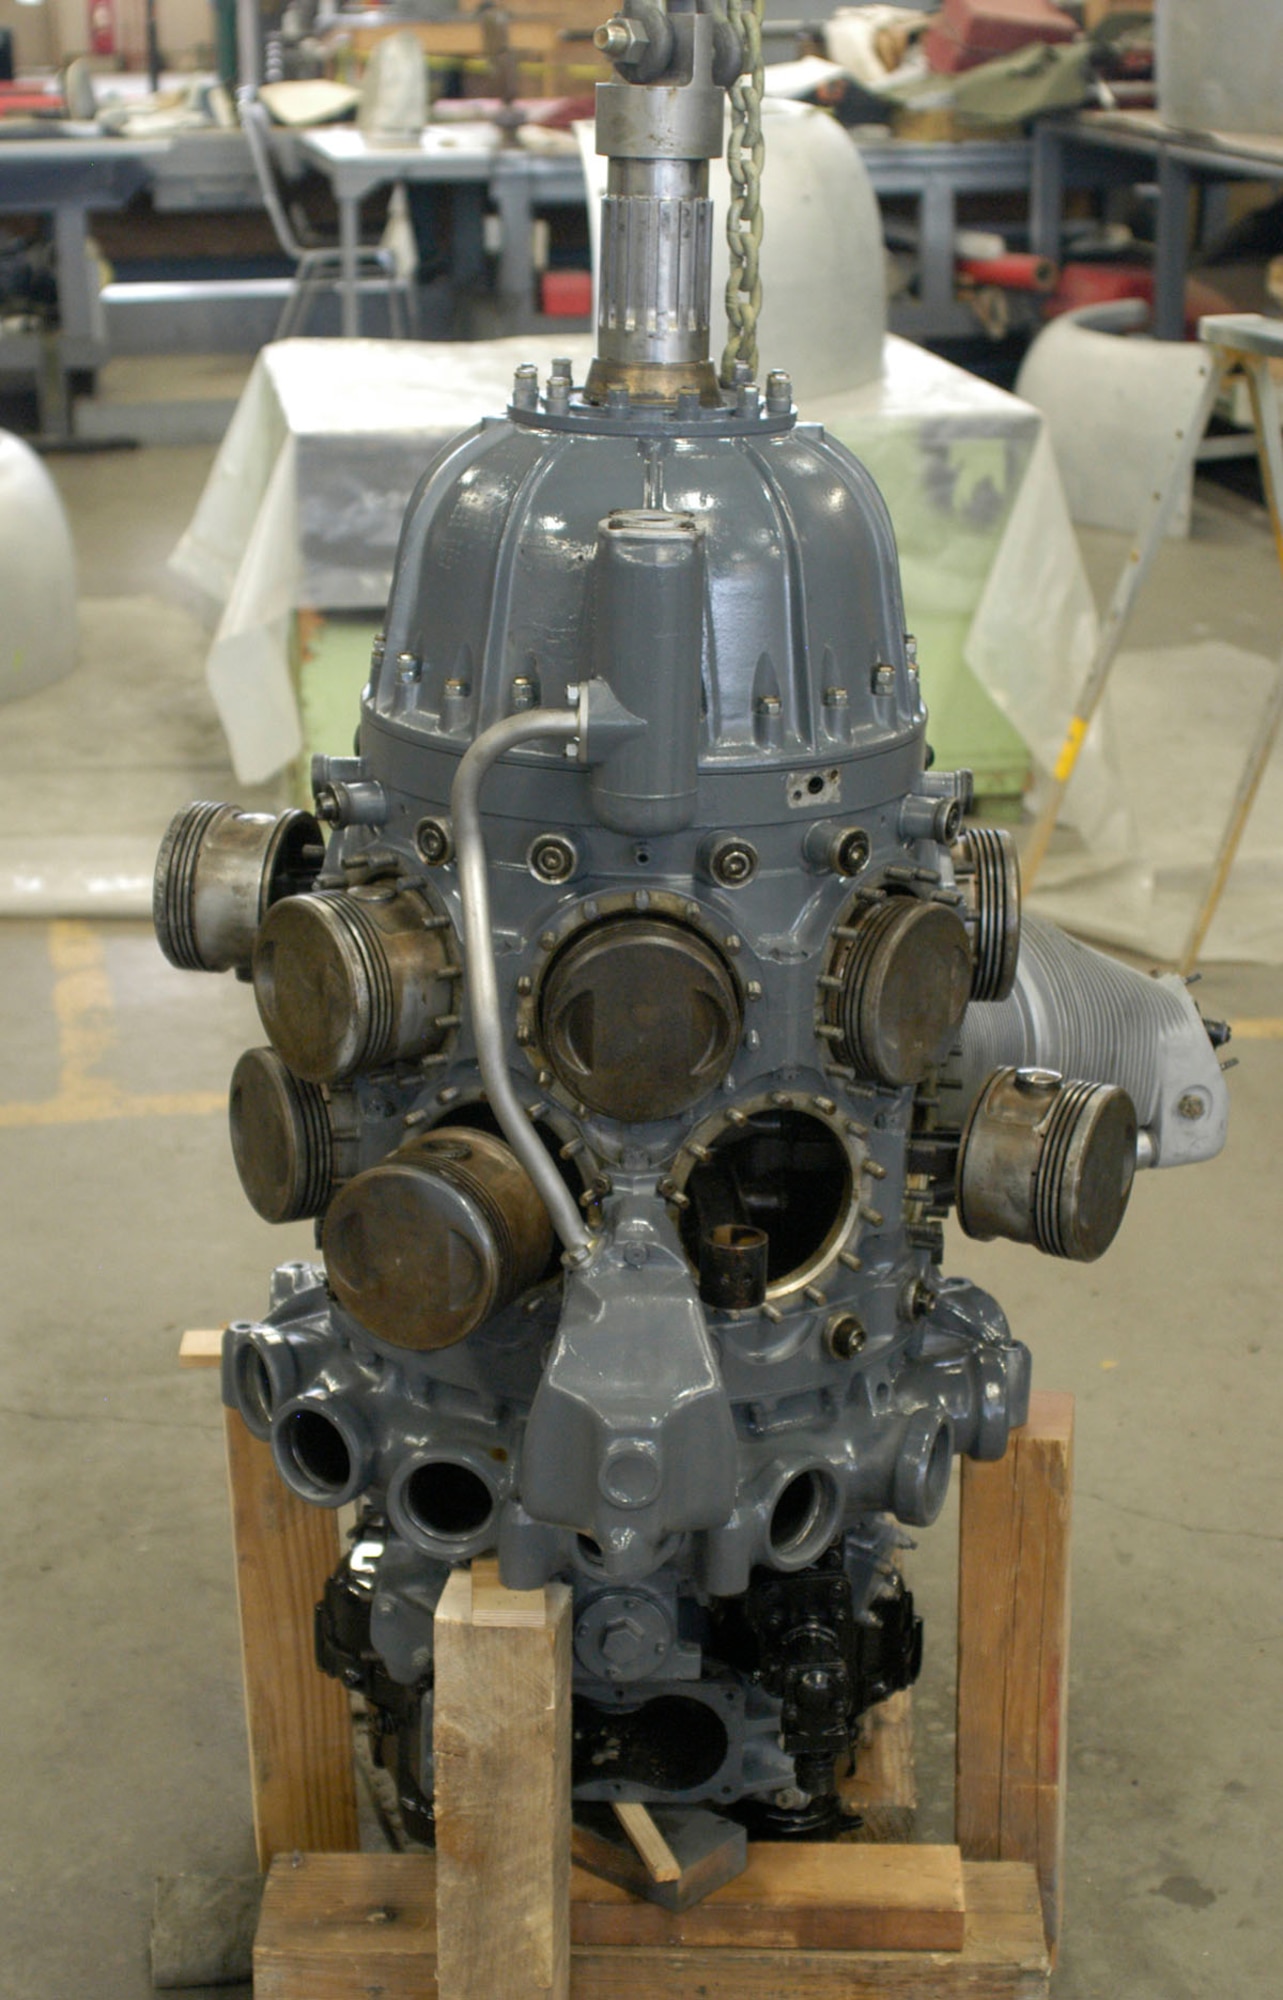 DAYTON, Ohio - The O-46A's R-1535-7 engine in the Restoration Hangar at the National Museum of the U.S. Air Force. (U.S. Air Force Photo)